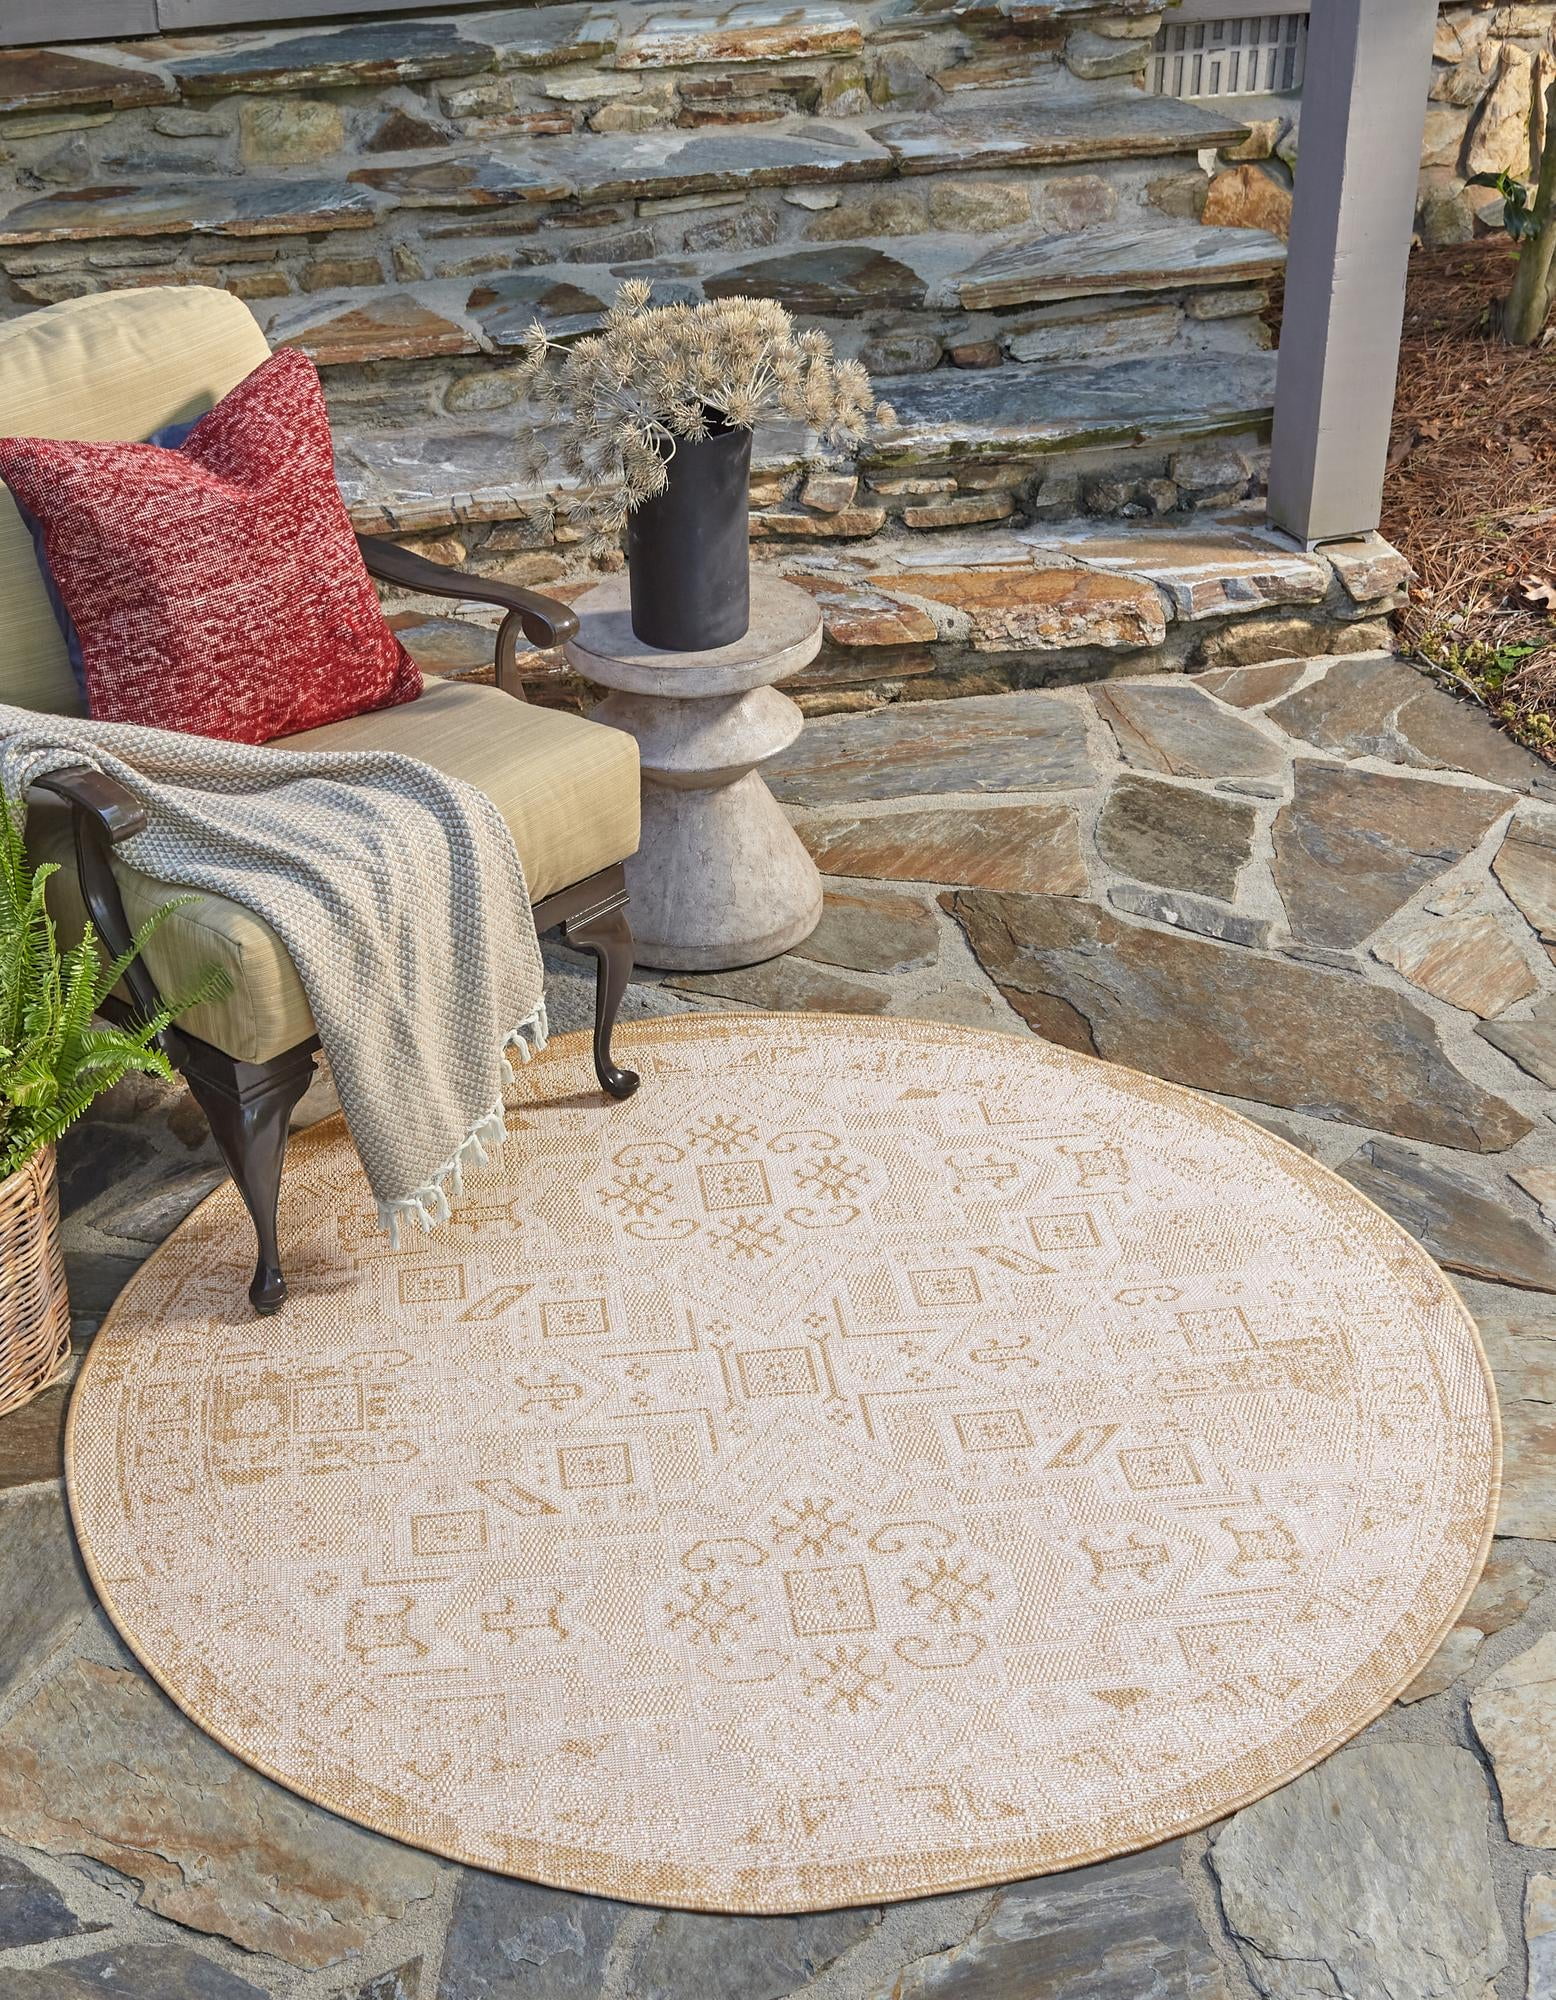 8 Ft Round Blue Flatweave Rug Perfect for Kitchens Rugs.com Outdoor Aztec Collection Rug Dining Rooms 